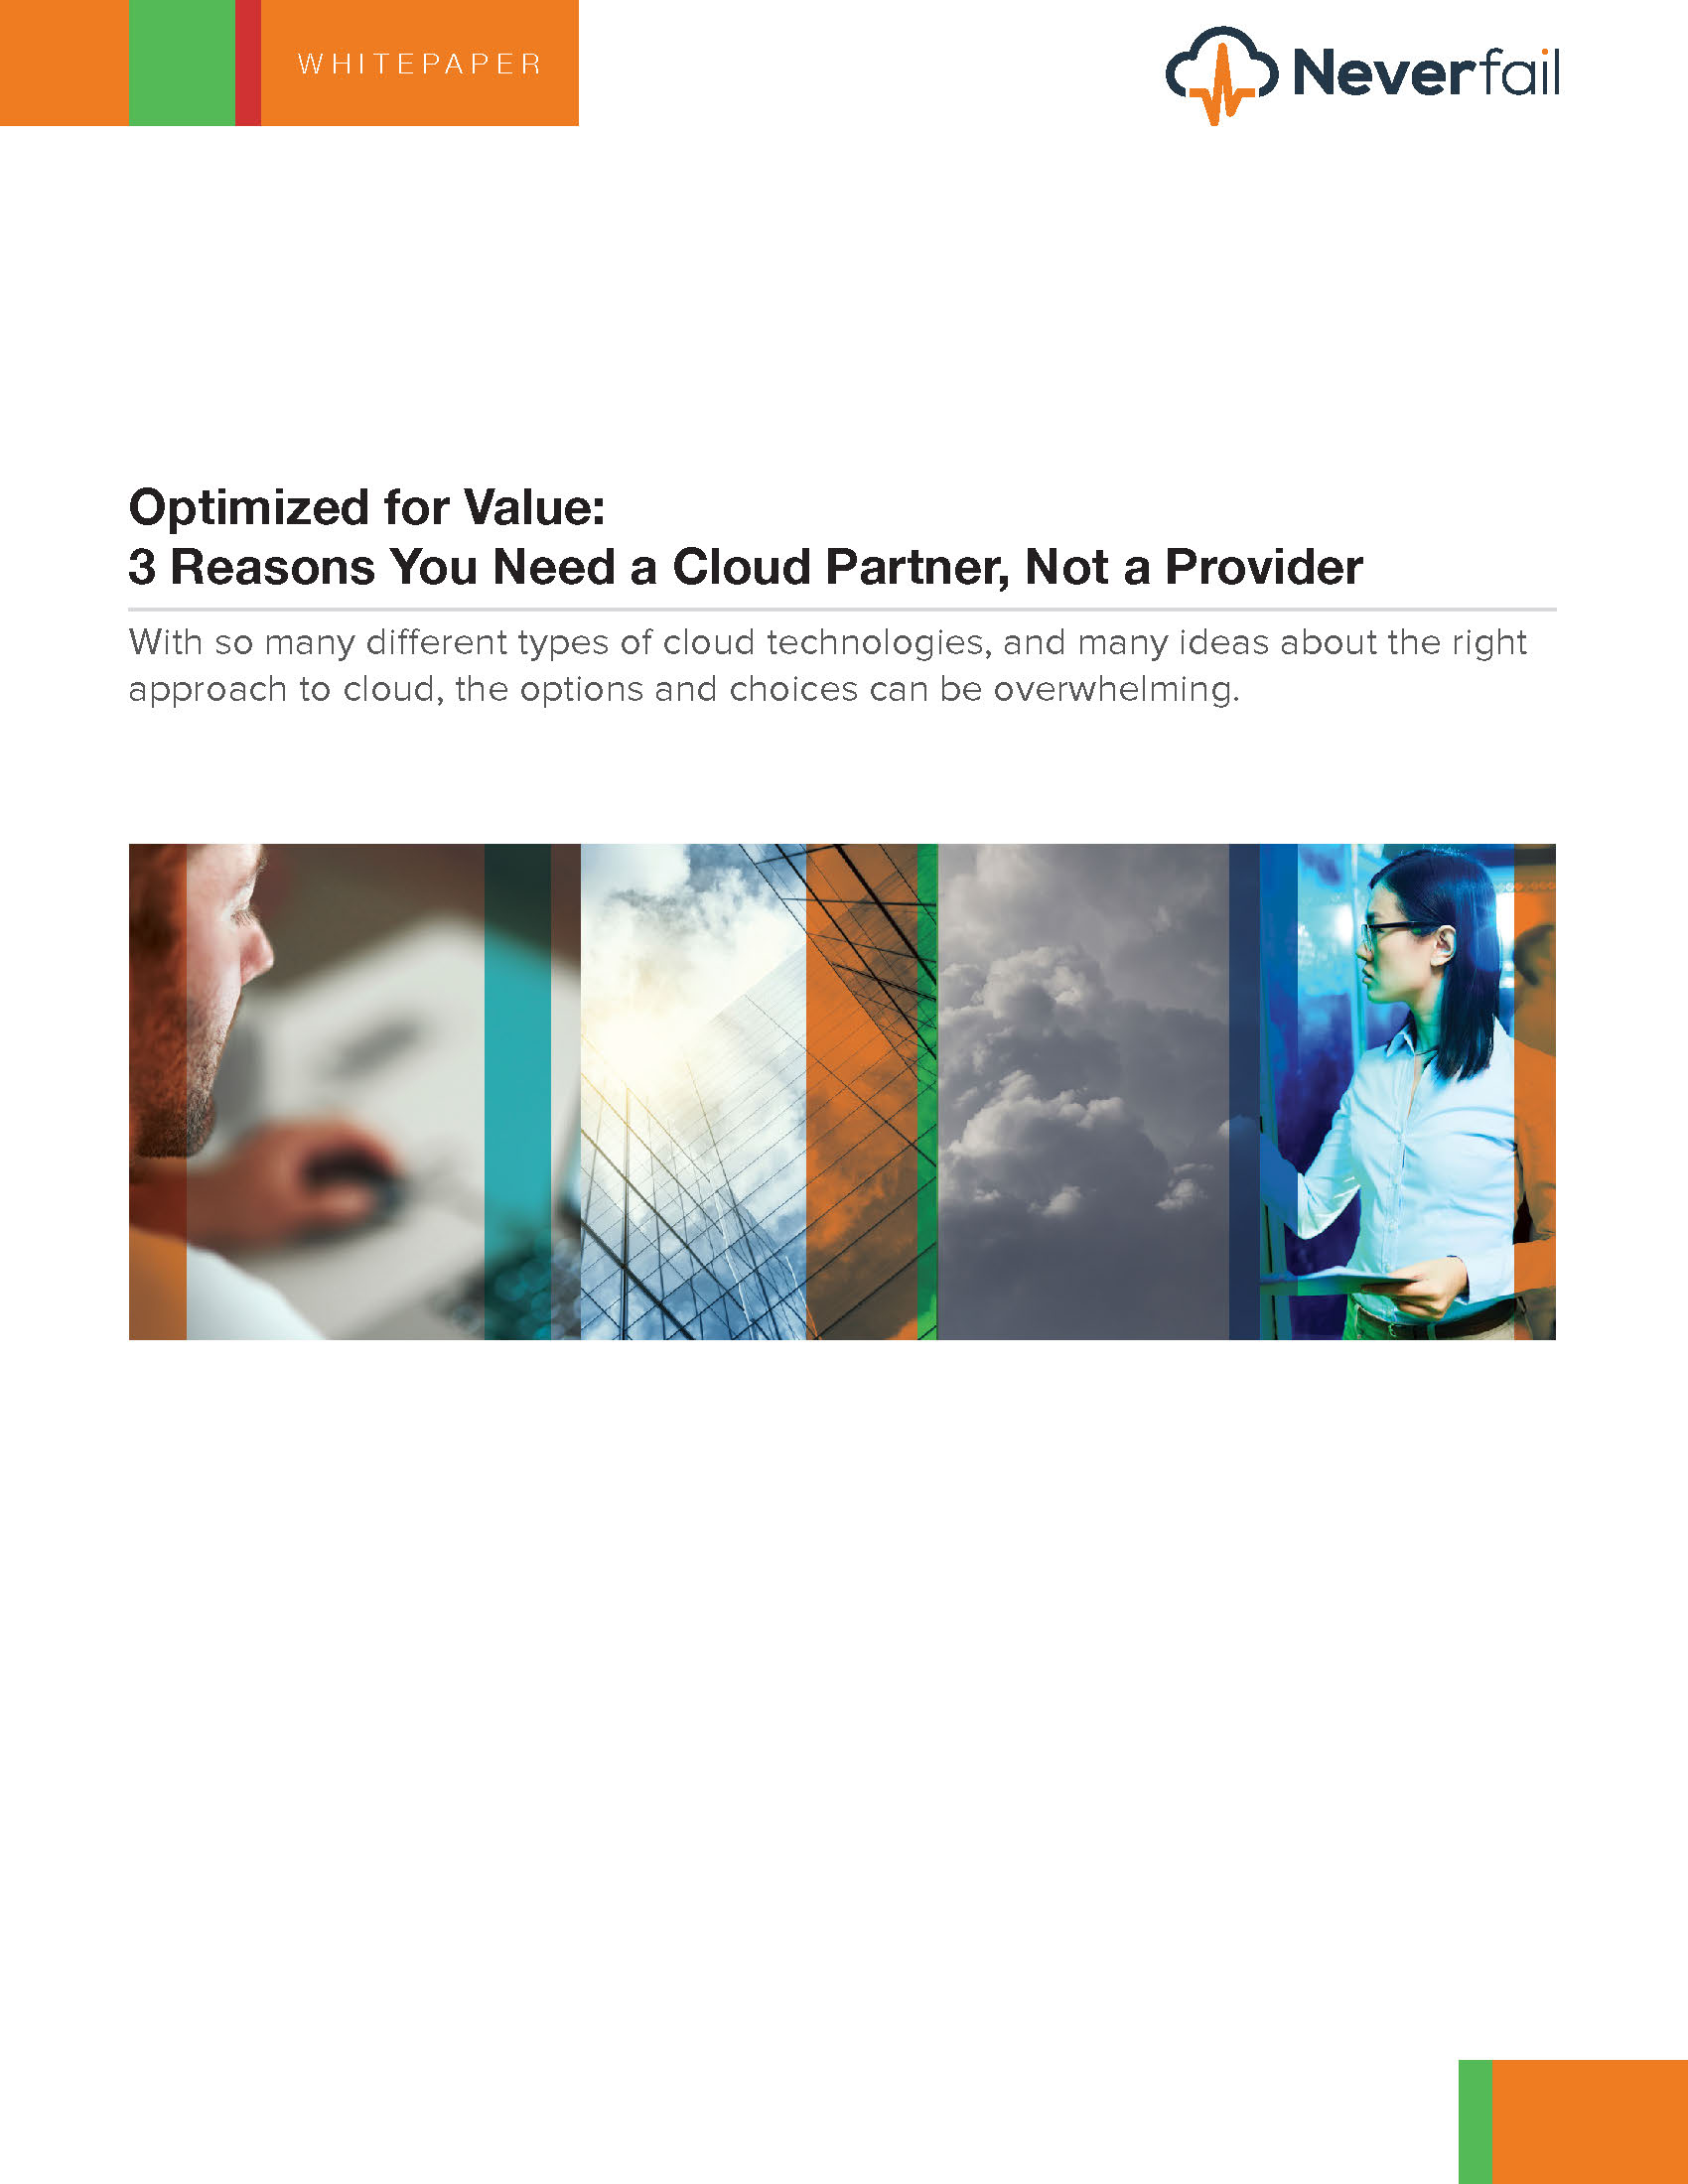 White paper best method for selecting cloud services provider